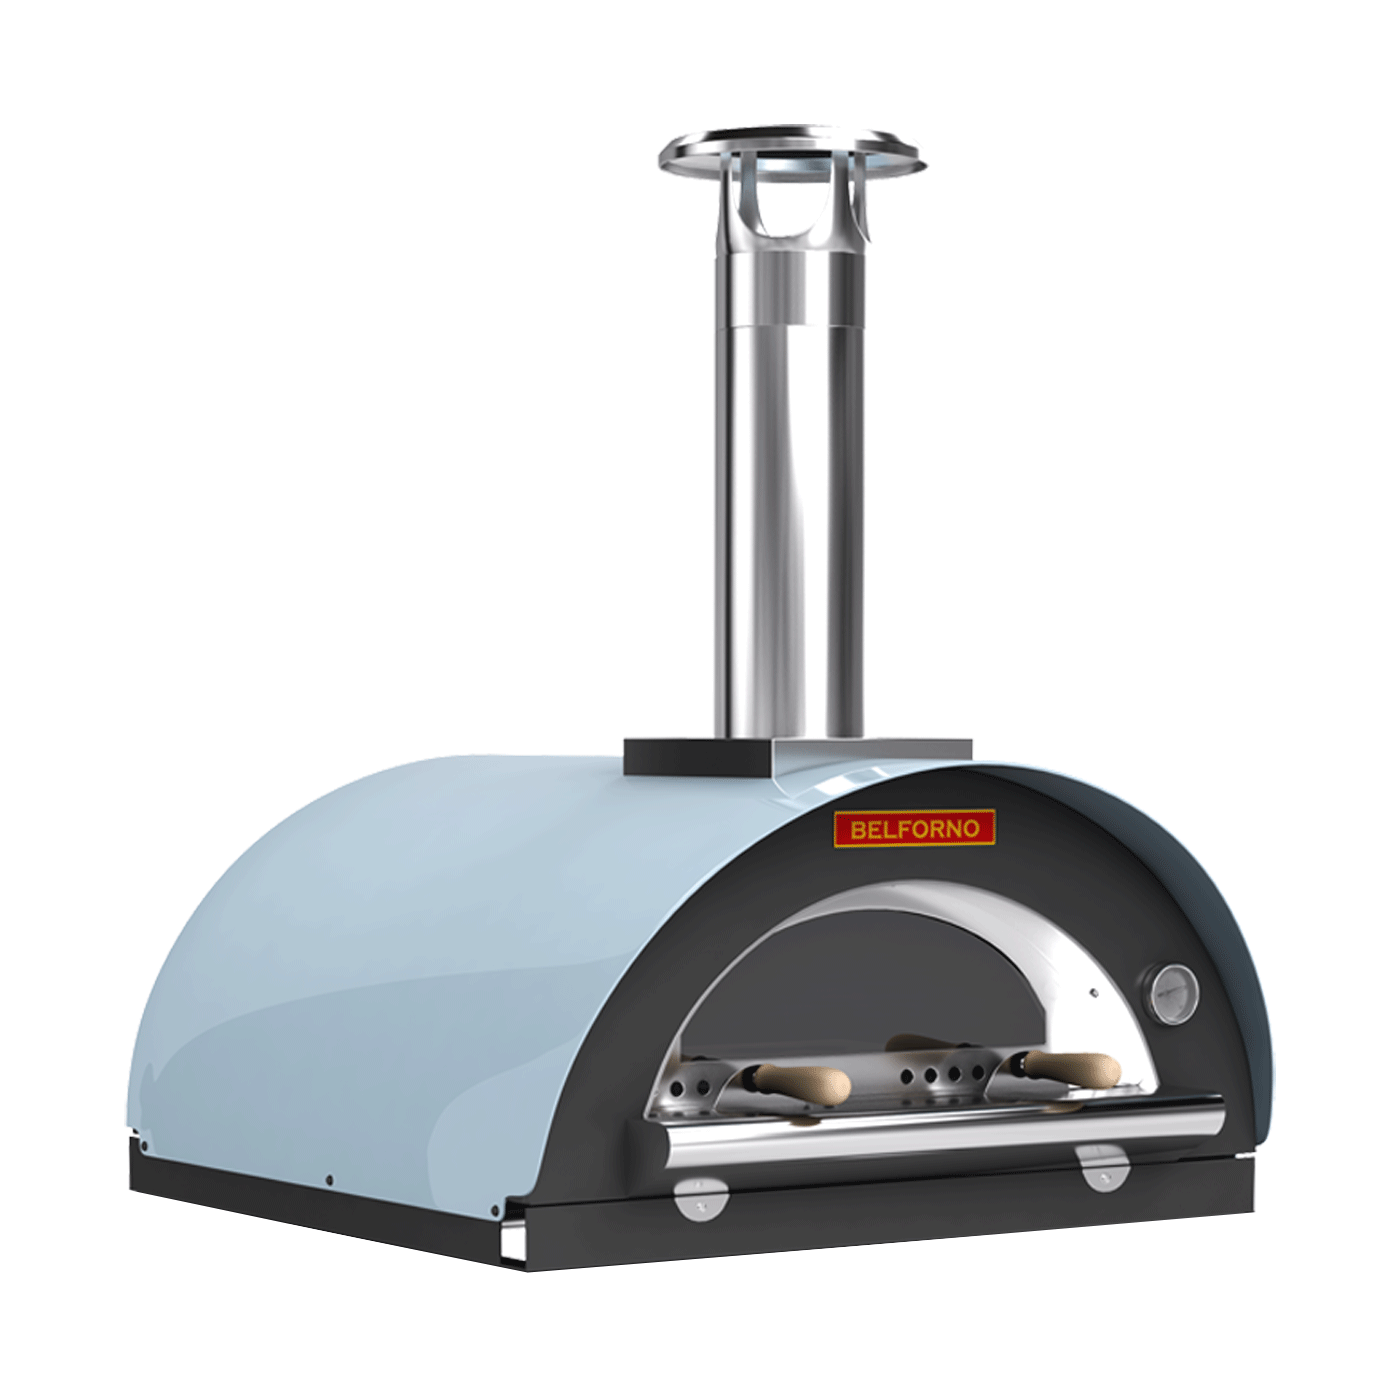 Belforno Piccolo Countertop Wood-fired Pizza Oven - Kitchen King Direct